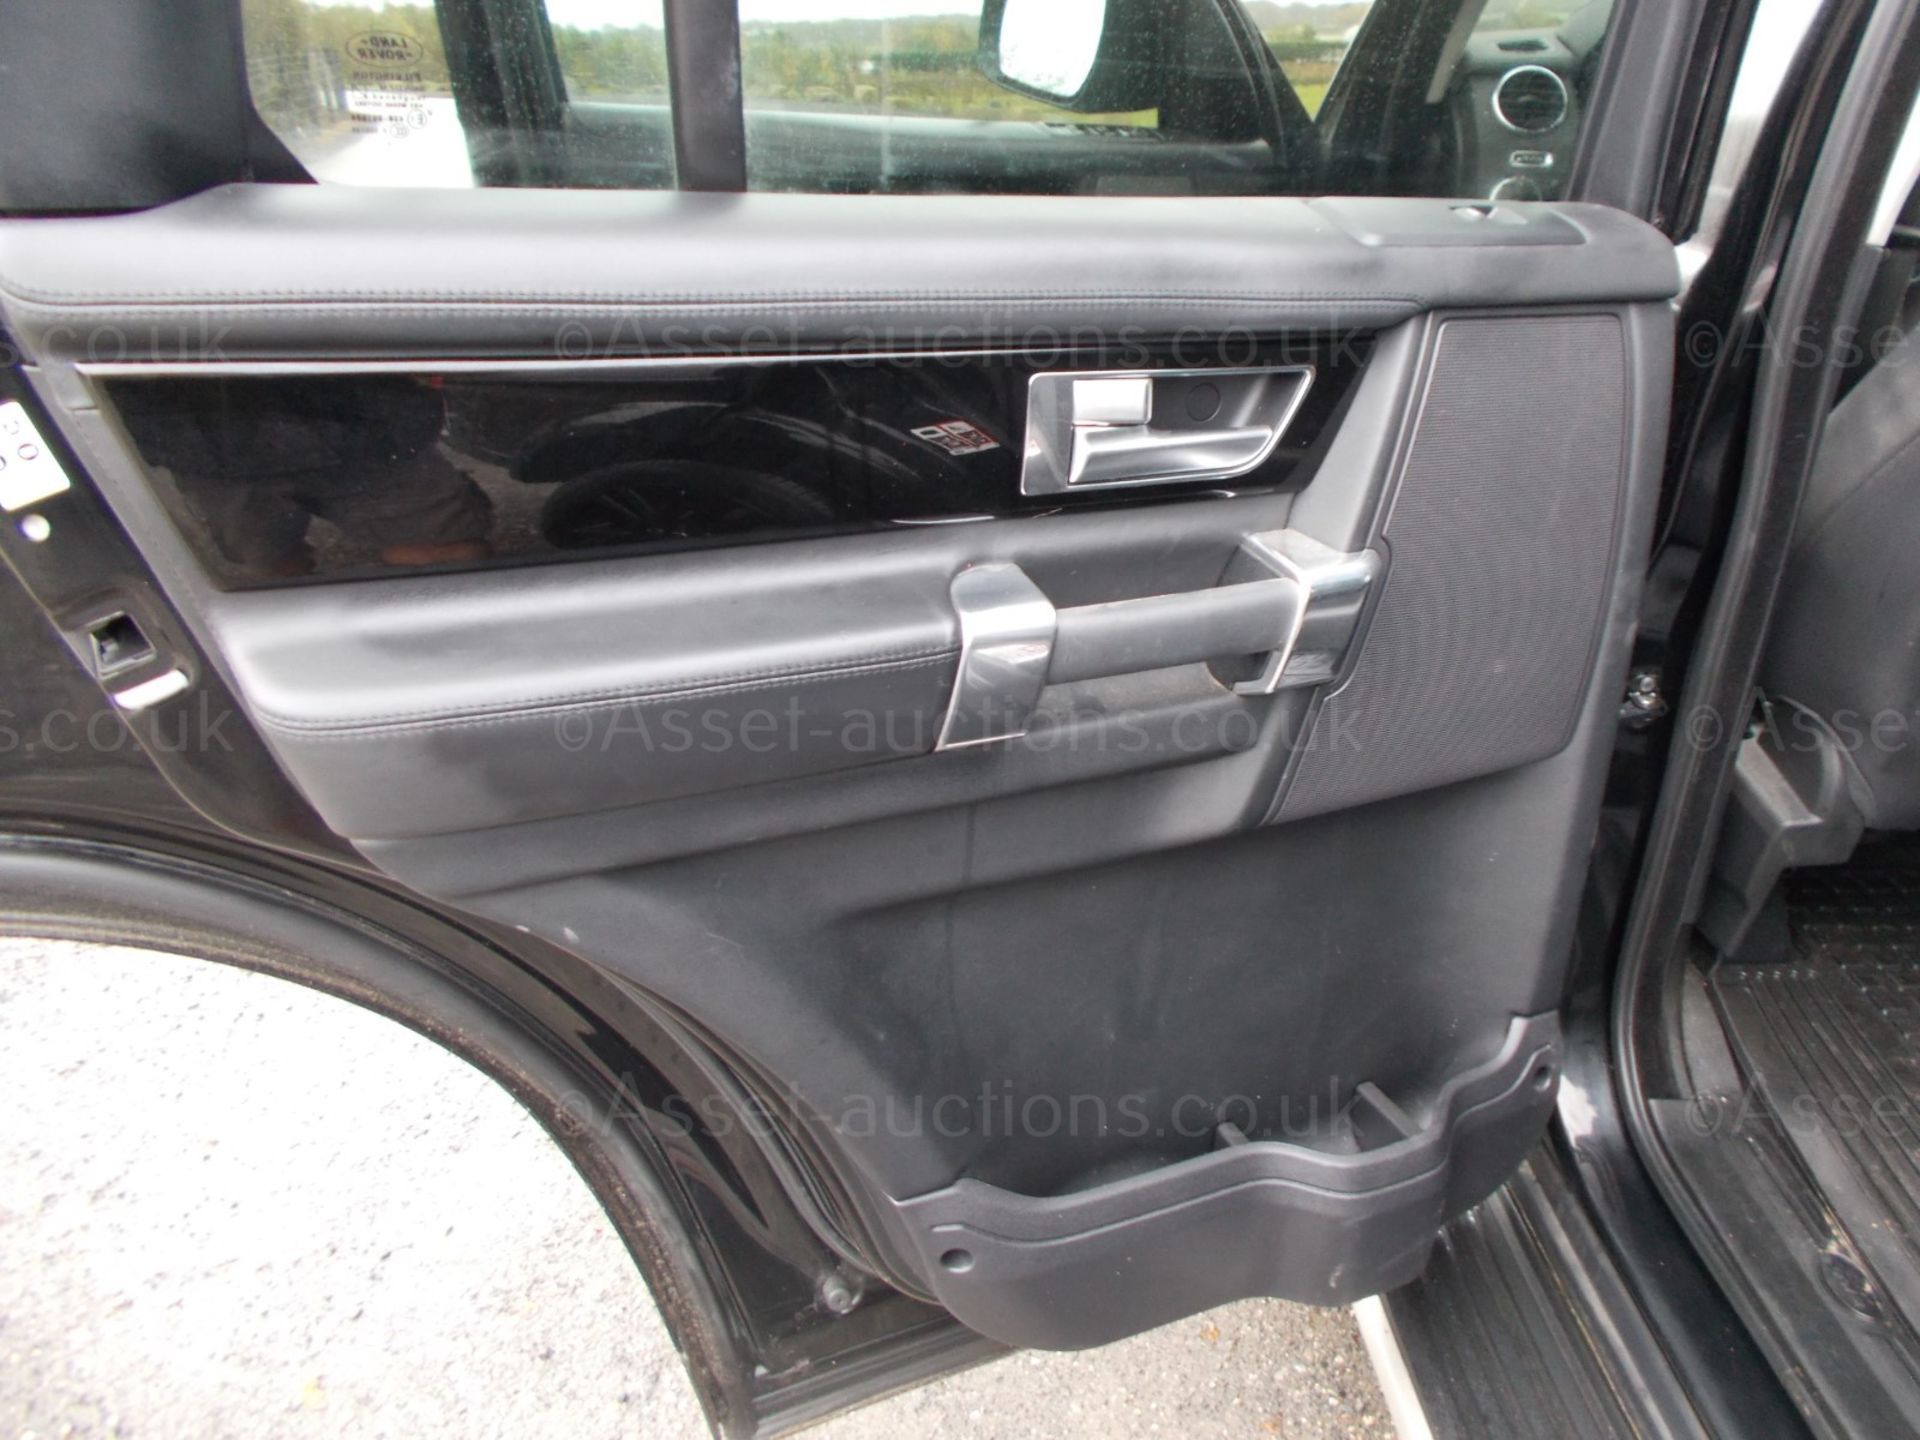 2015/64 LAND ROVER DISCOVERY HSE LUXURY SCV6 7 SEATER, 3.0 V6 PETROL SUPERCHARGED *NO VAT* - Image 12 of 27